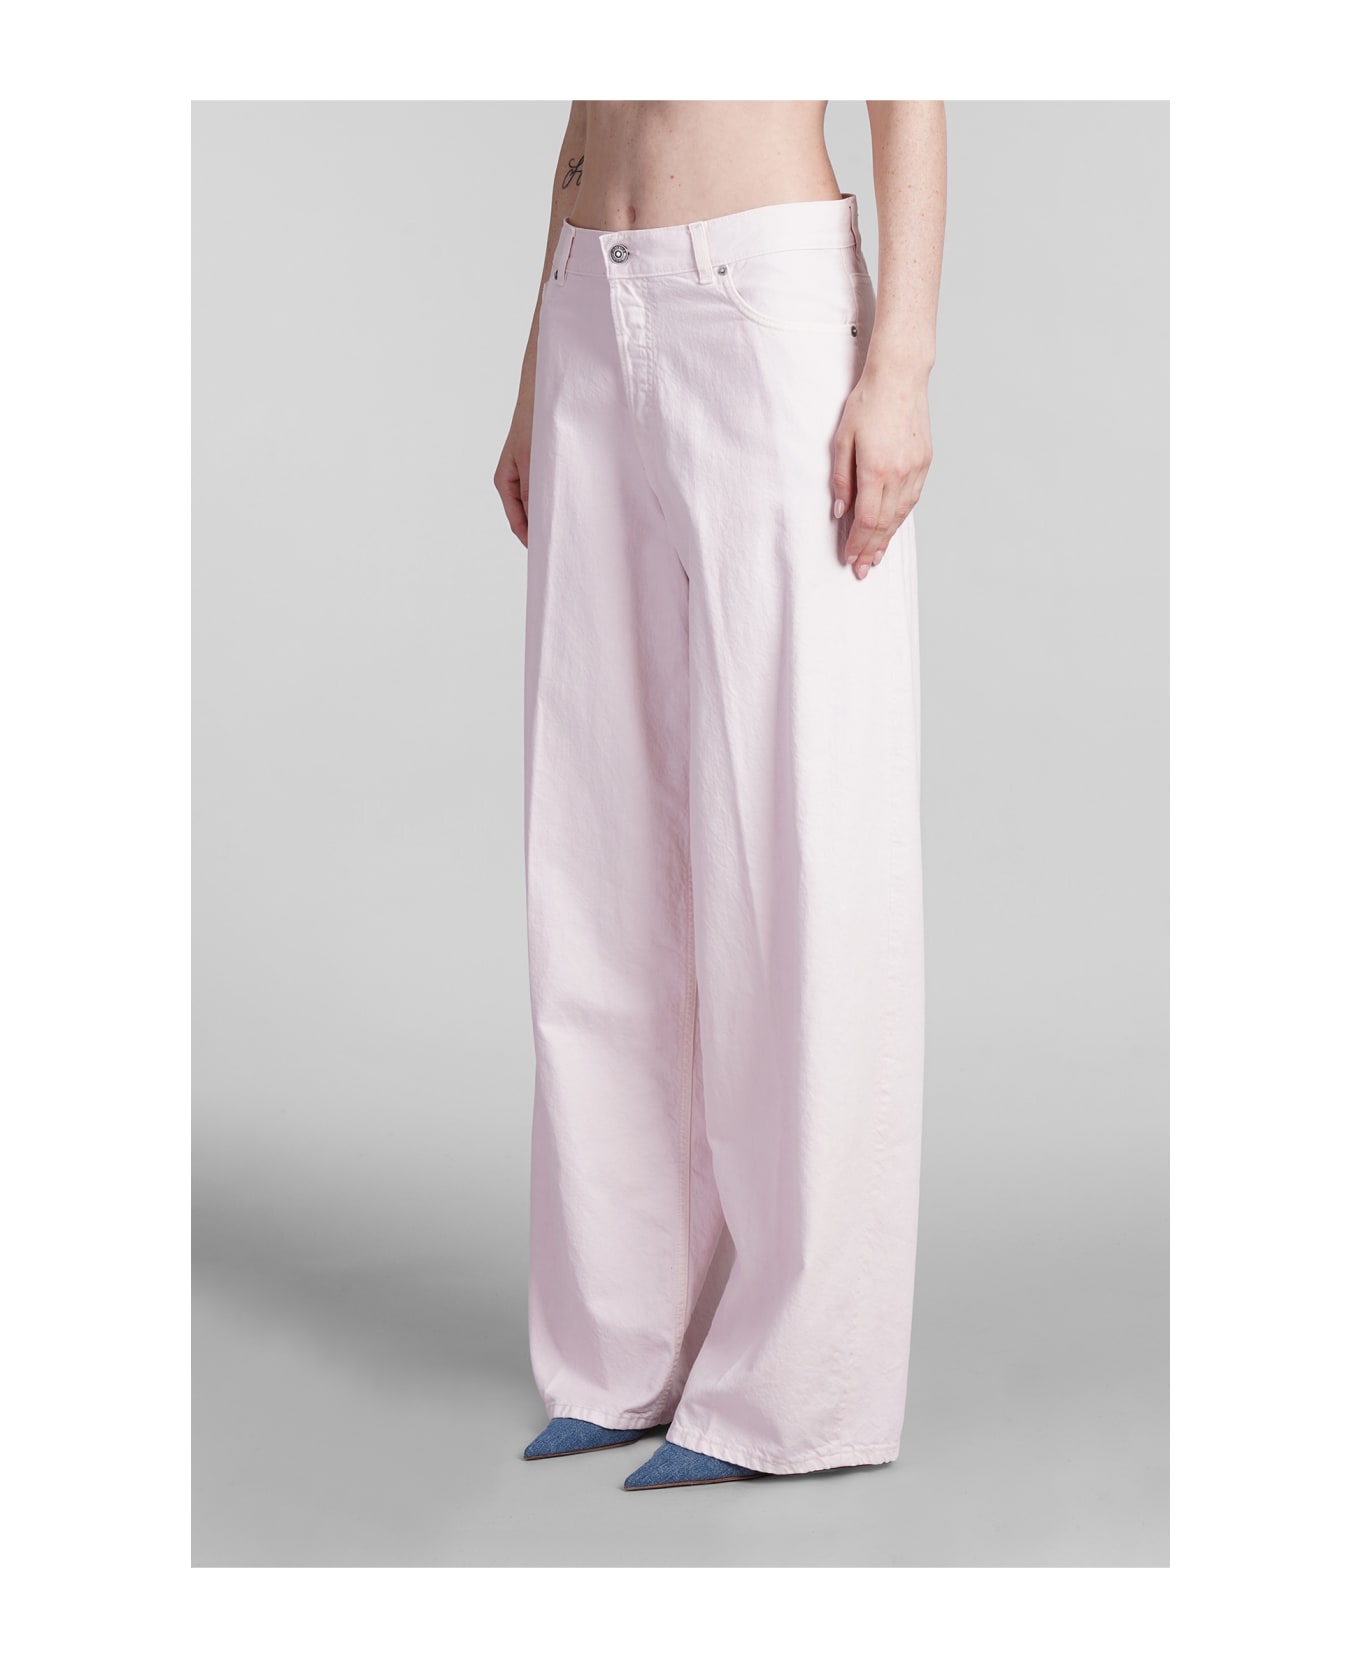 Haikure Bethany Jeans In Rose-pink Cotton - rose-pink